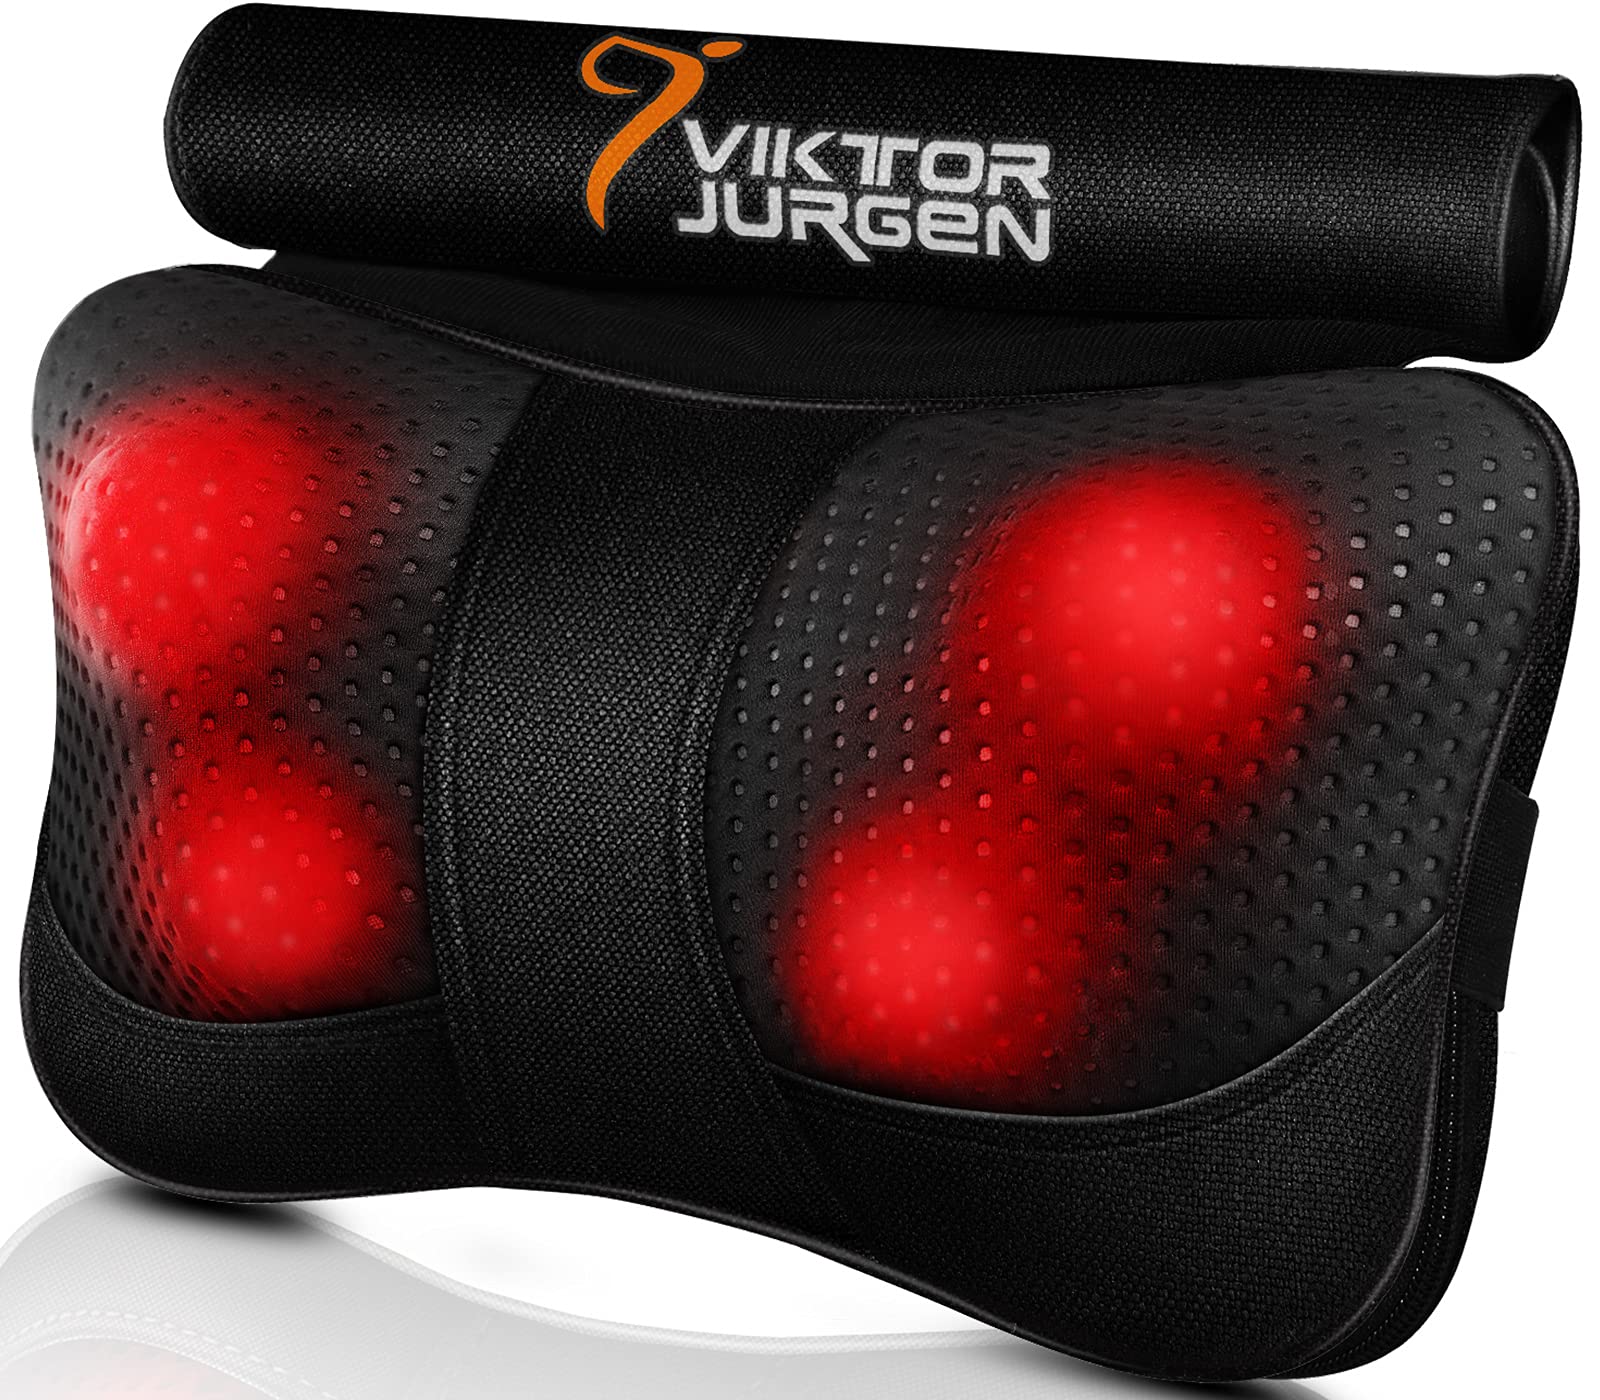 Viktor Jurgen Shiatsu Back Neck and Shoulder Massager with Heat - NEW -  health and beauty - by owner - household sale